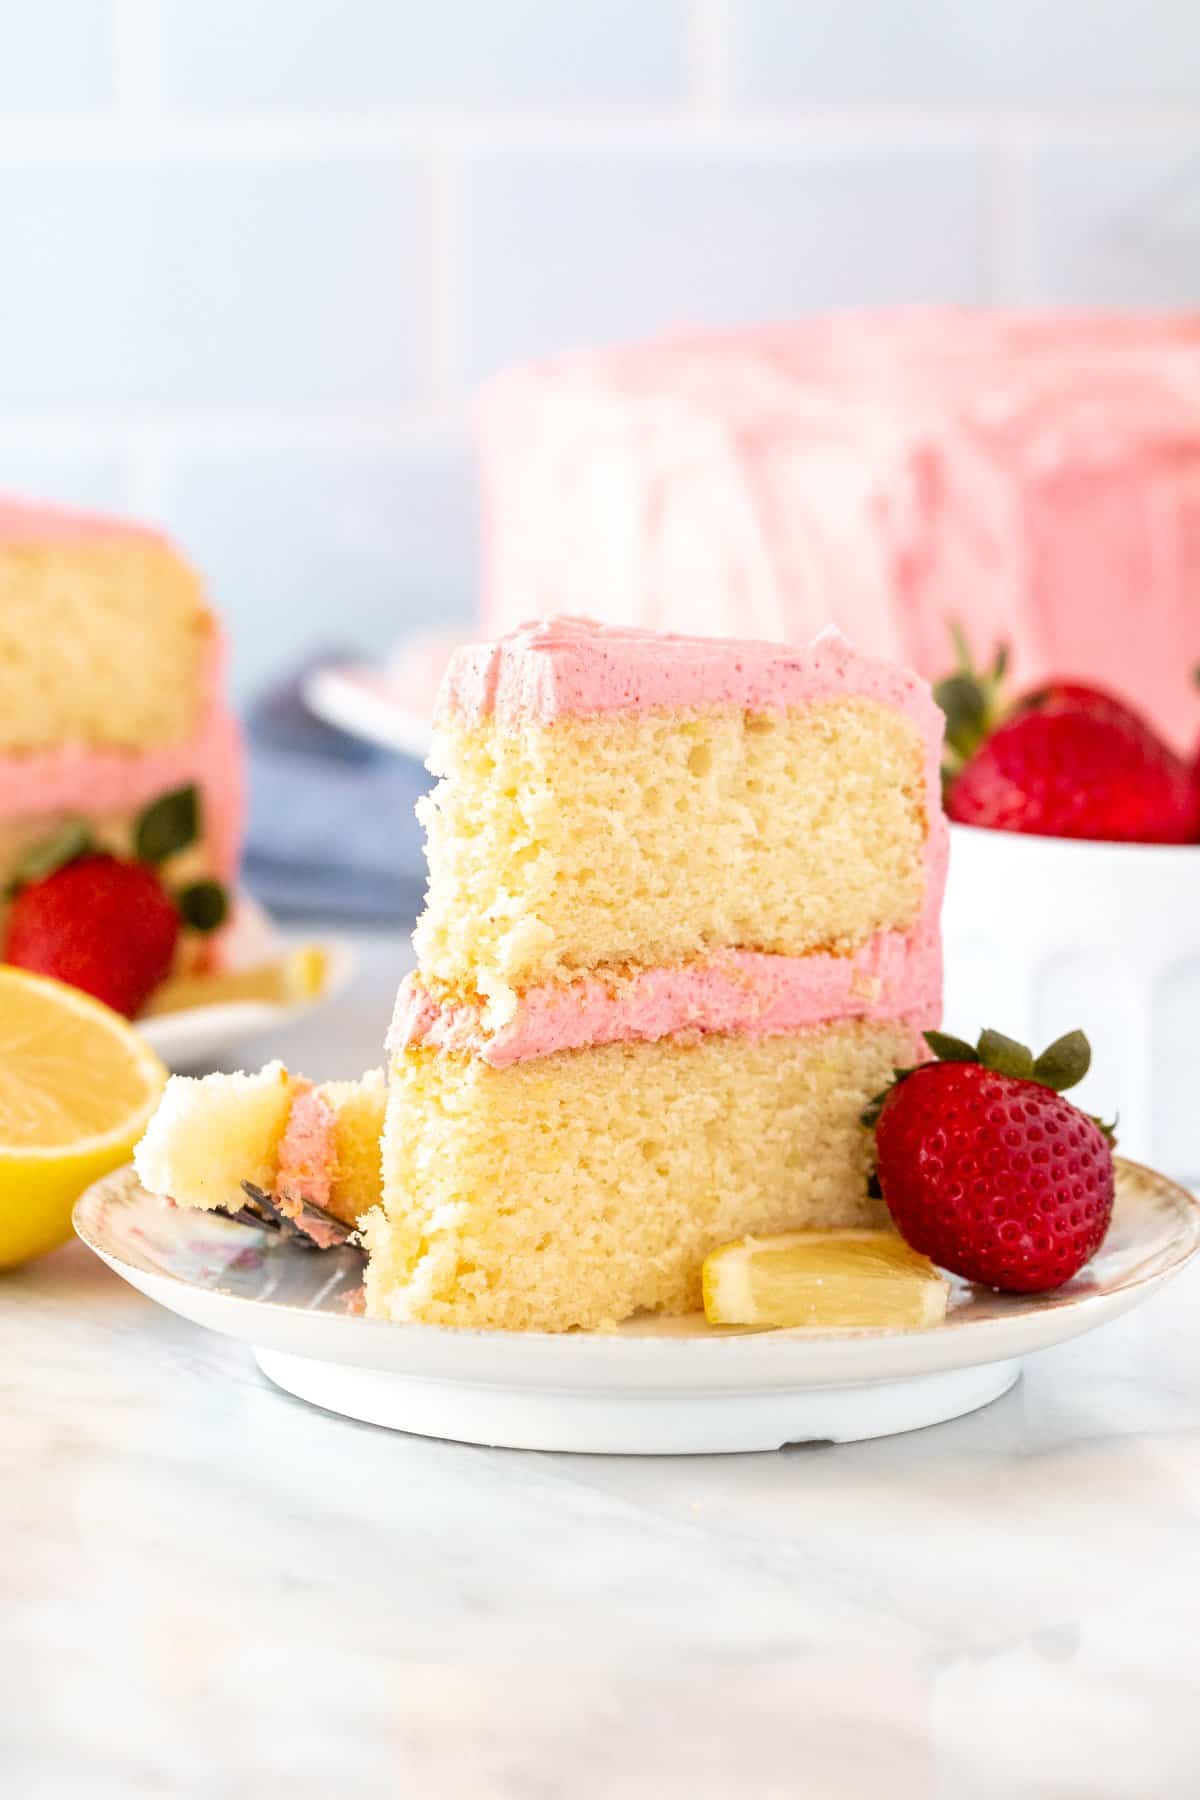 Slice of lemon layer cake with strawberry frosting